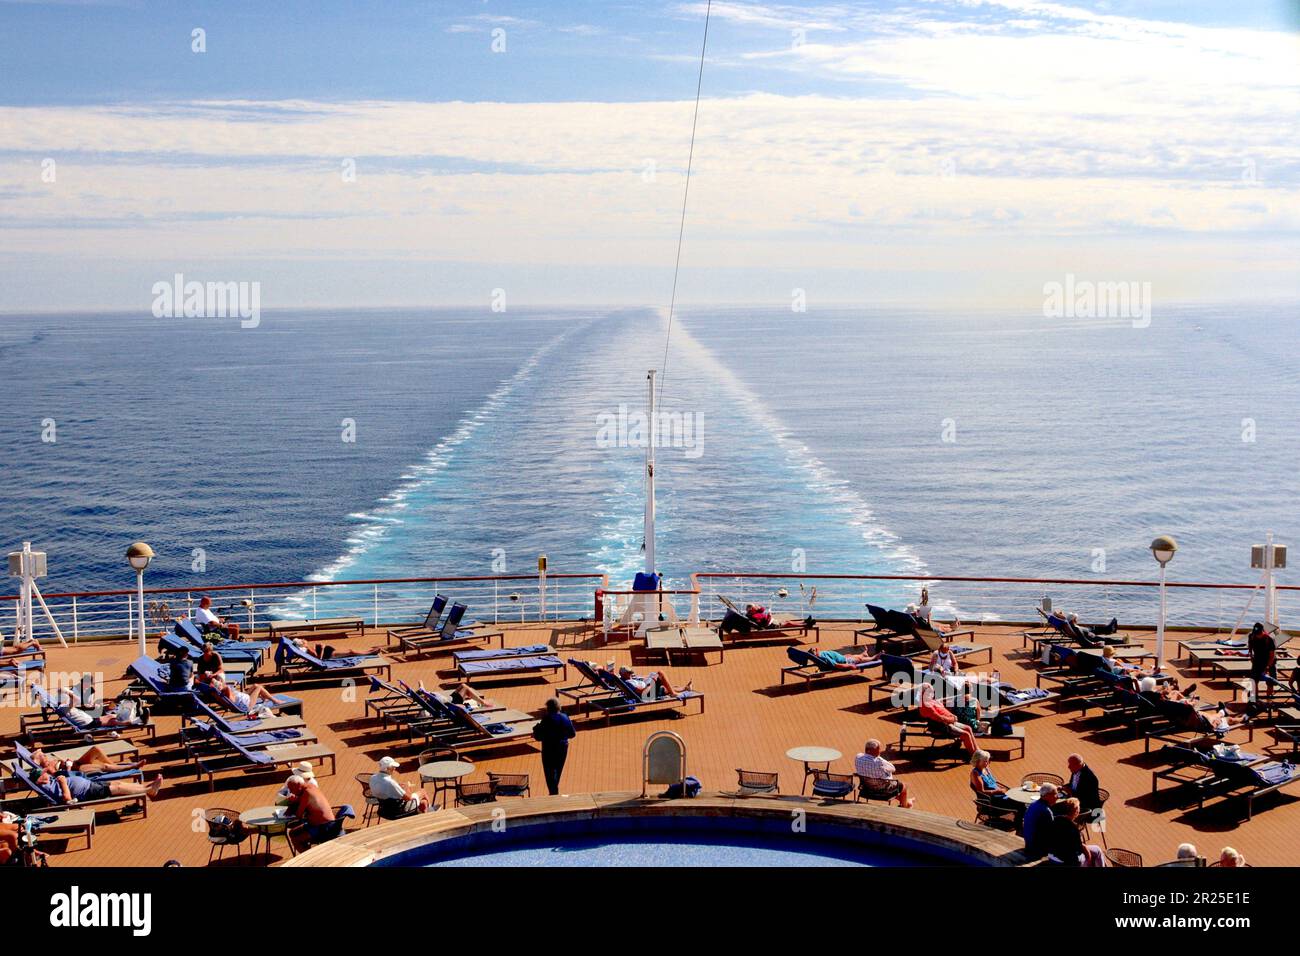 Populated sunbeds appear magnetically aligned to the afternoon sun surrounding the Aquarius pool situated at the stern of the P&O cruise ship Arcadia. Stock Photo